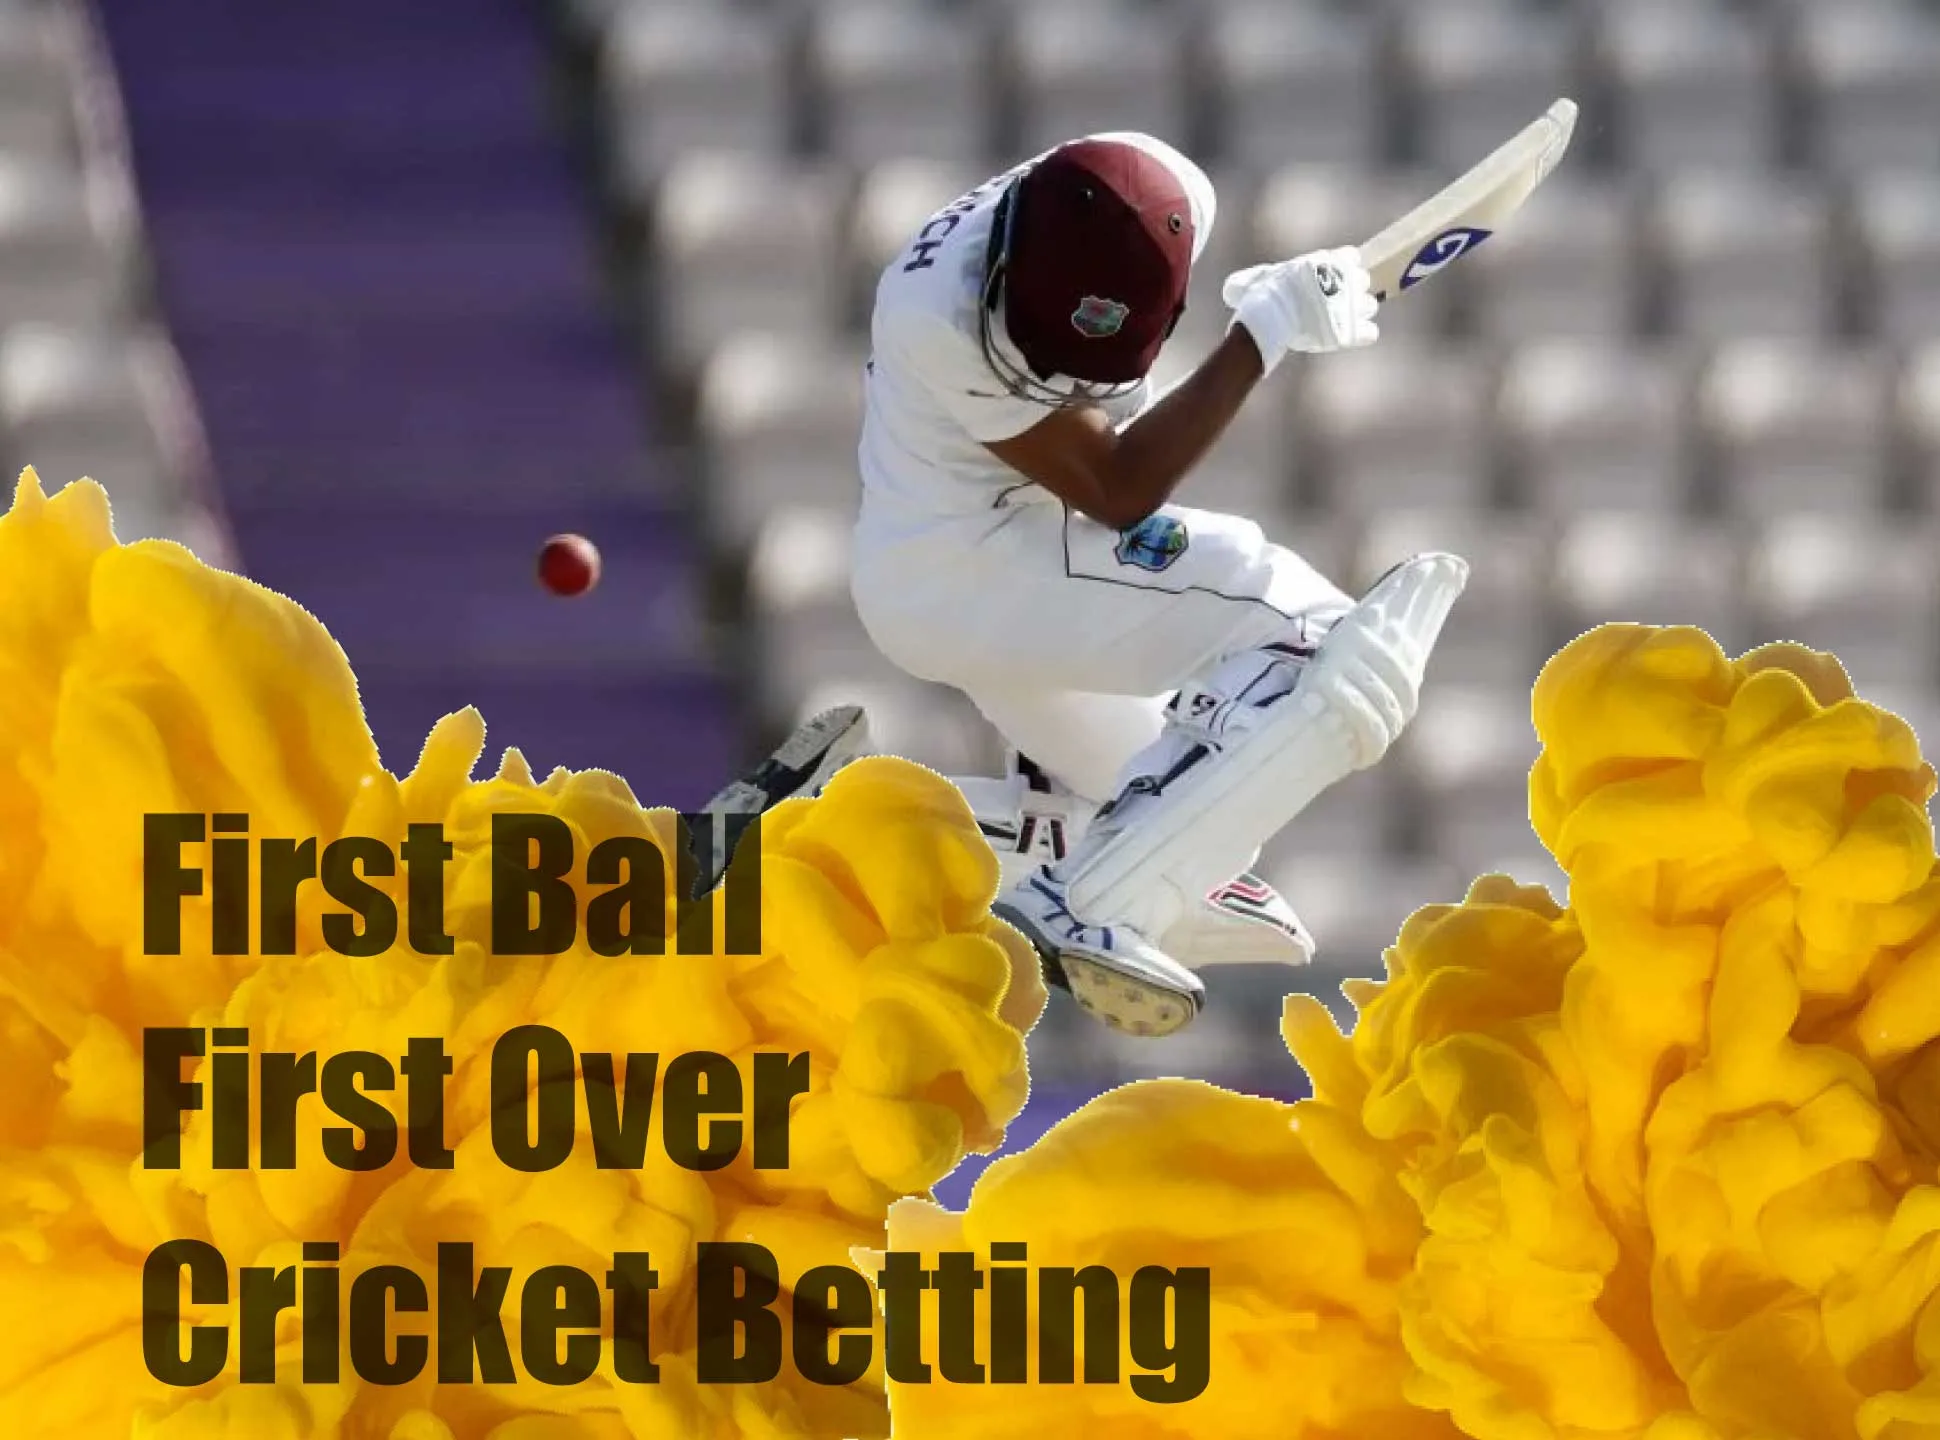 Bet on the outcome of the first ball.